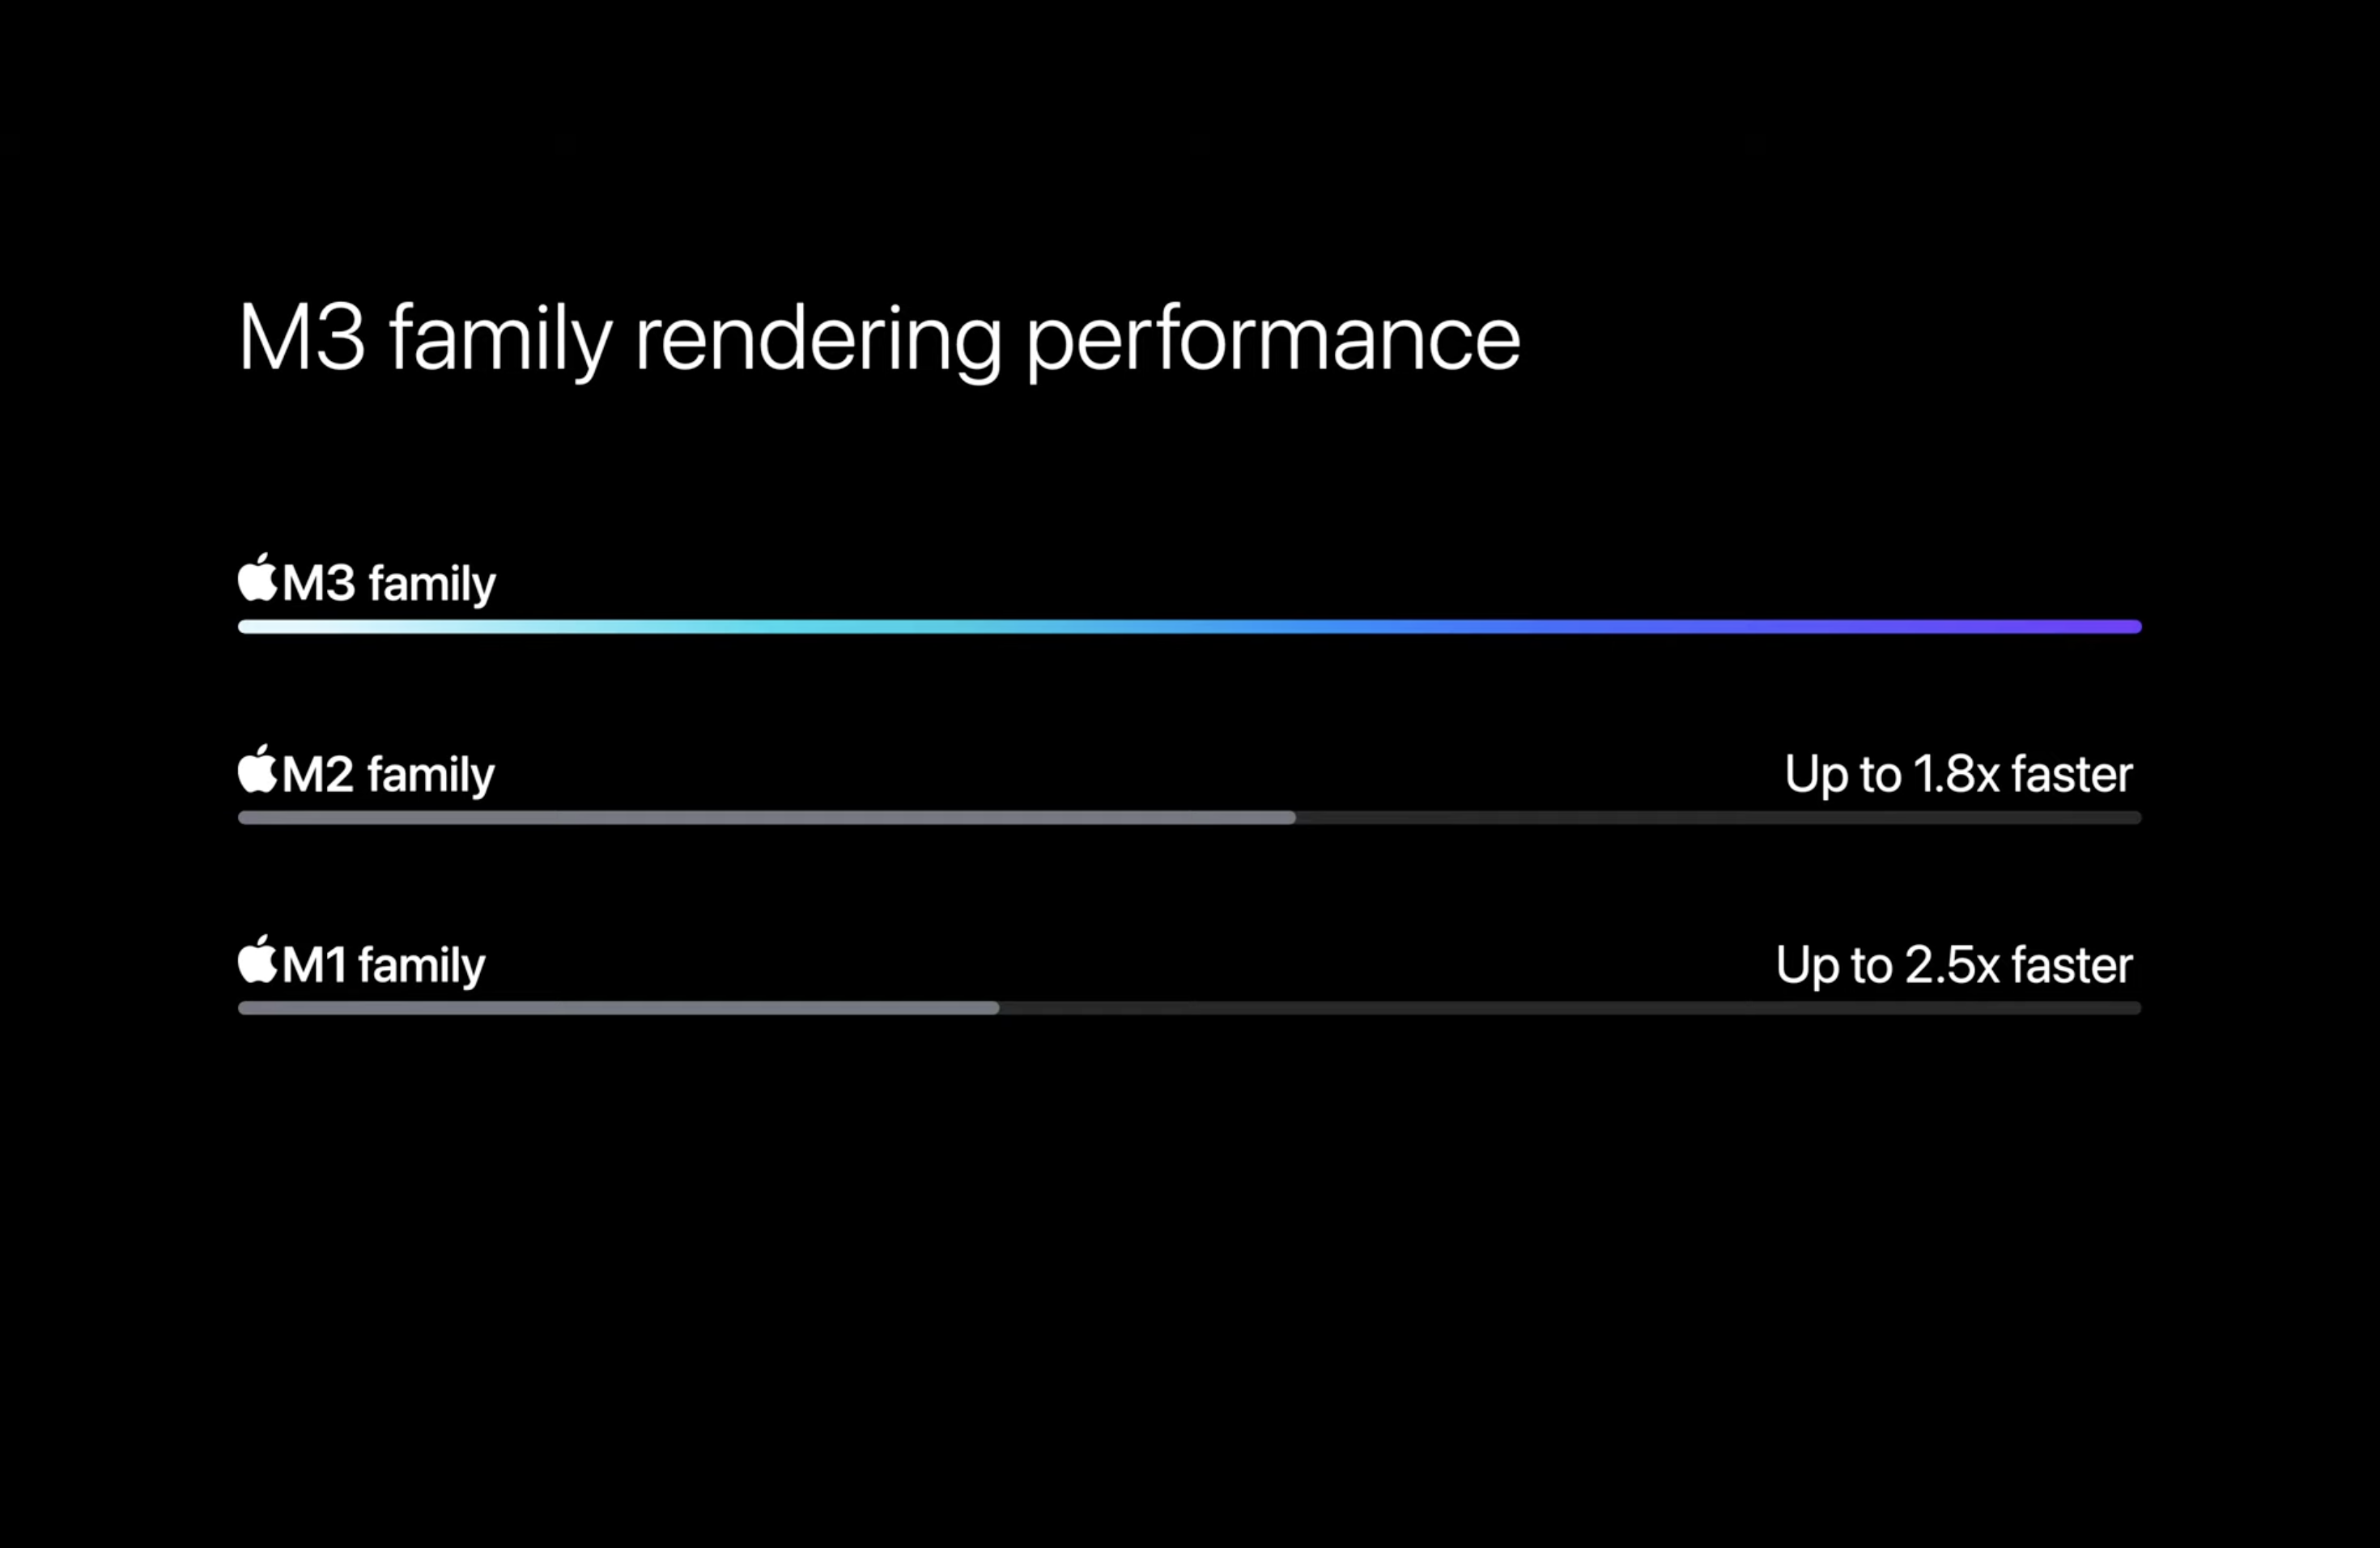 M3 Family Rendering Performance Gains